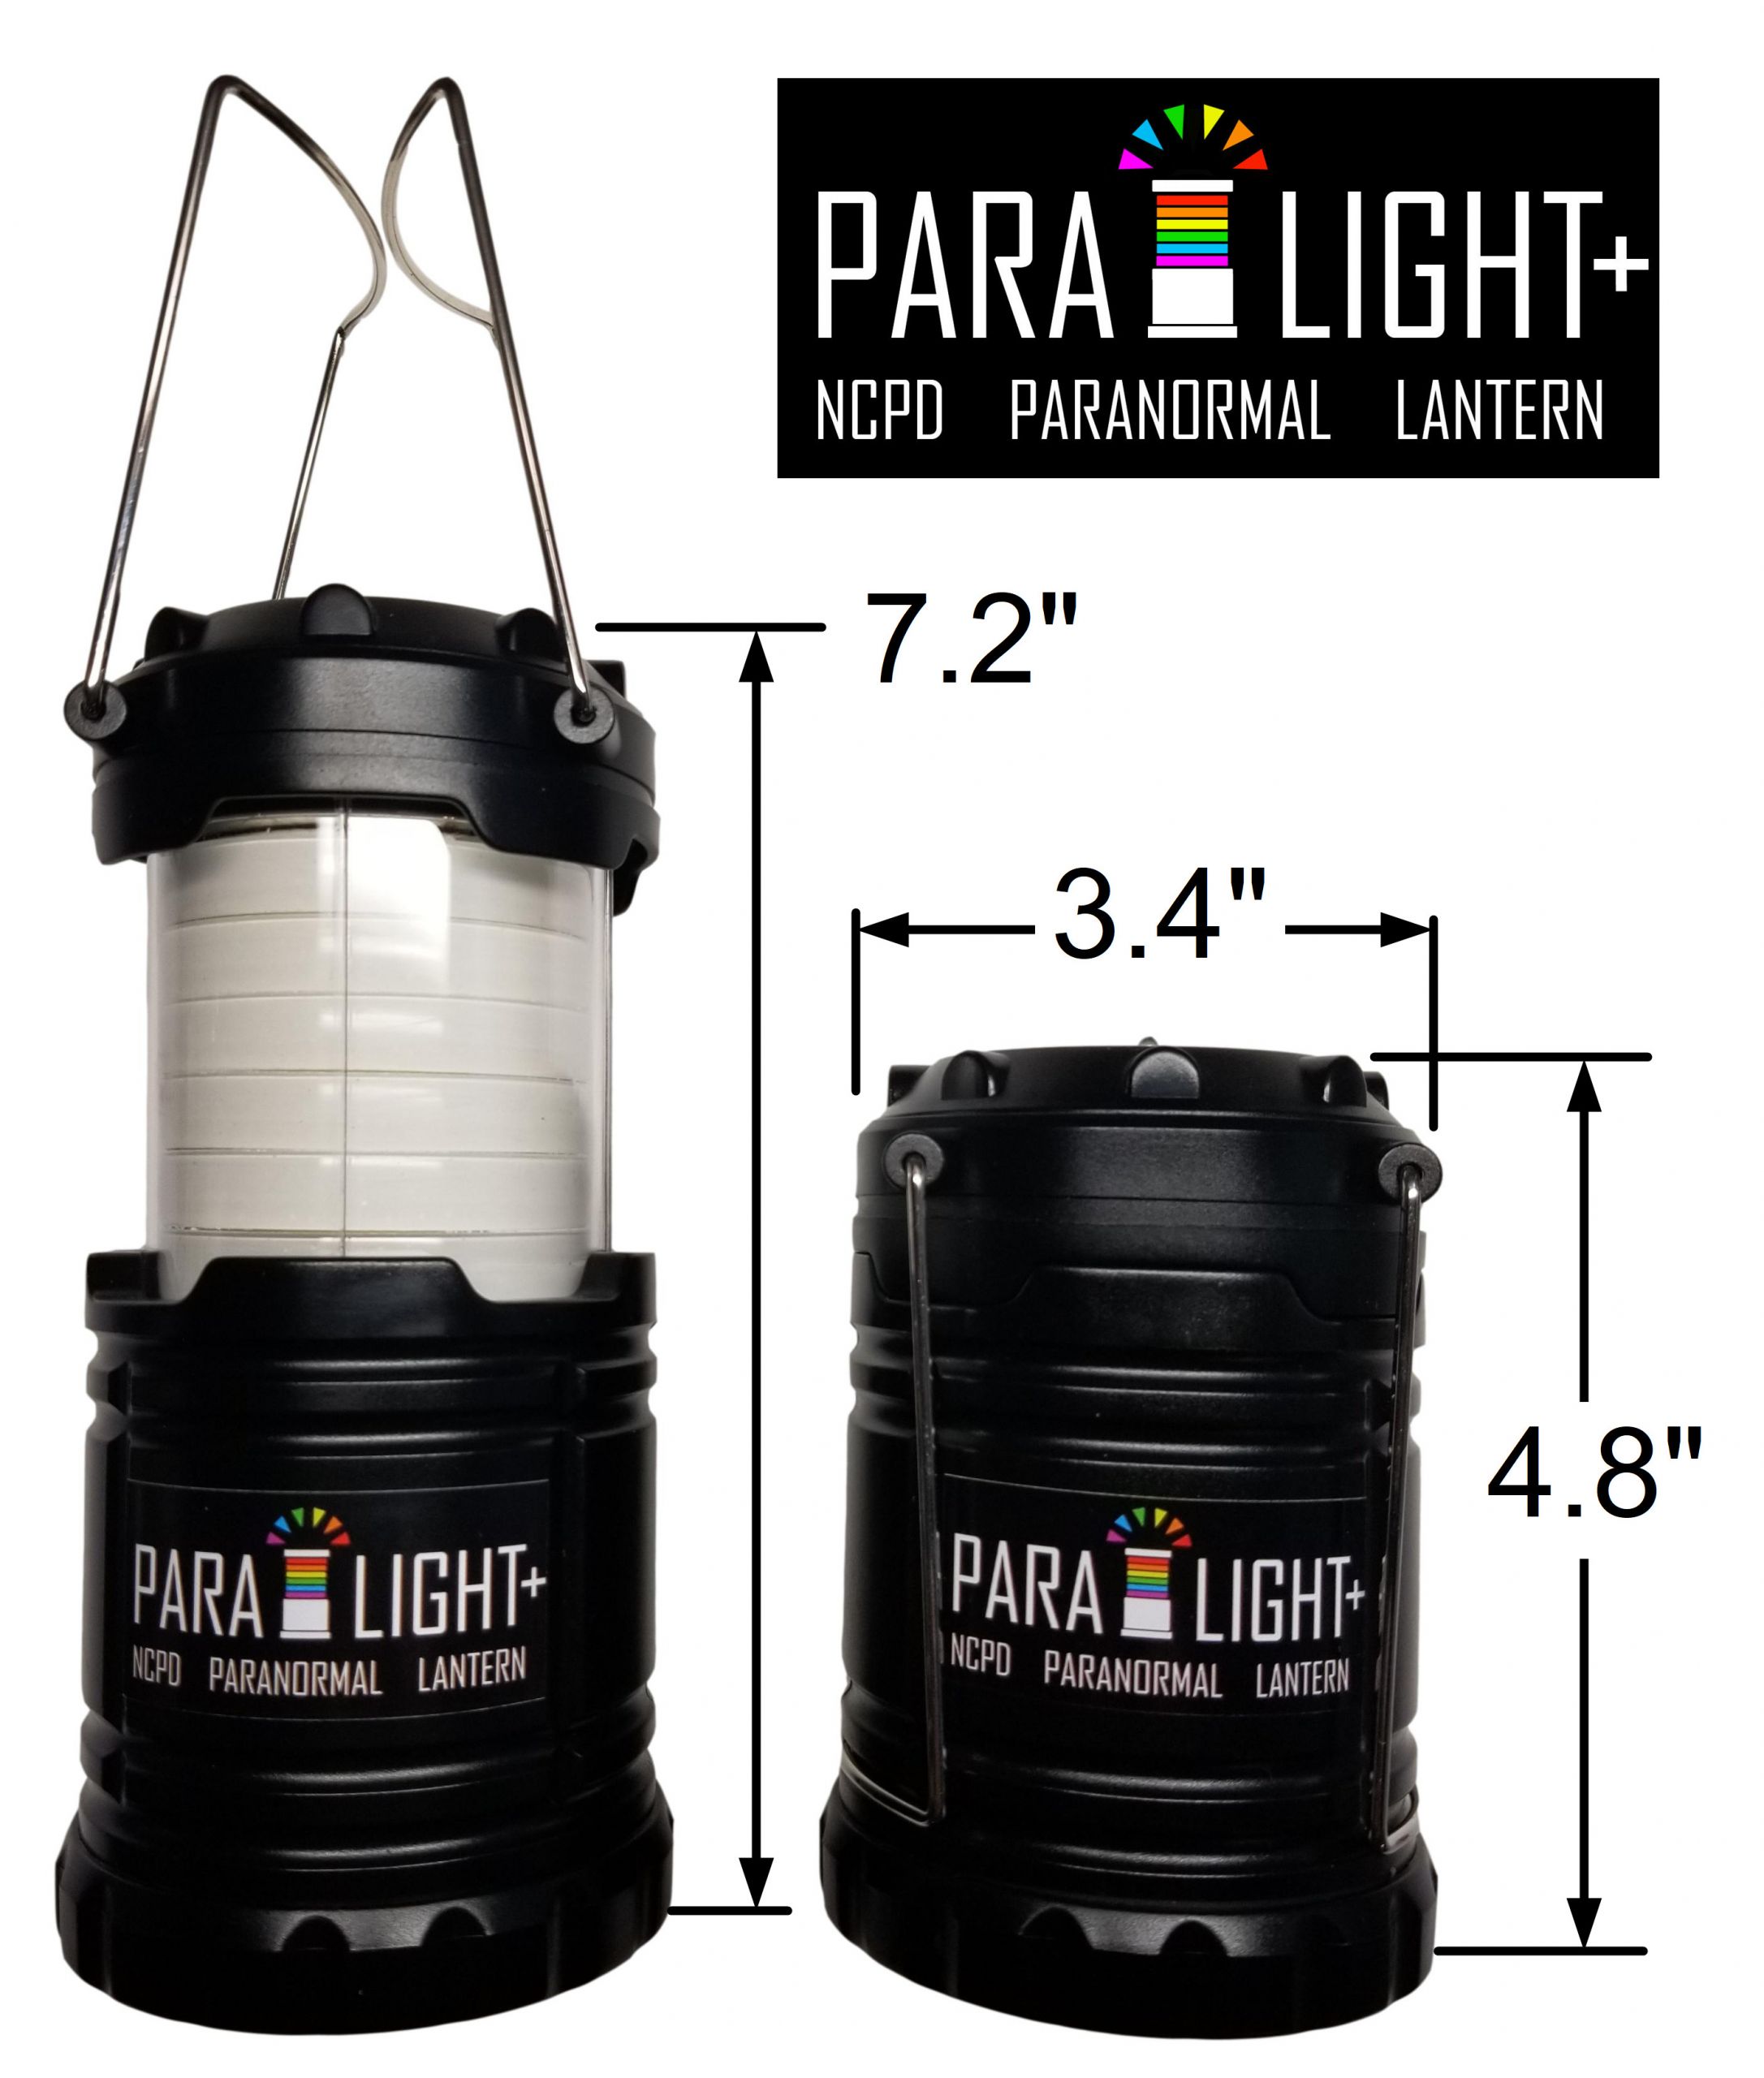 PARA LIGHT + By NCPD